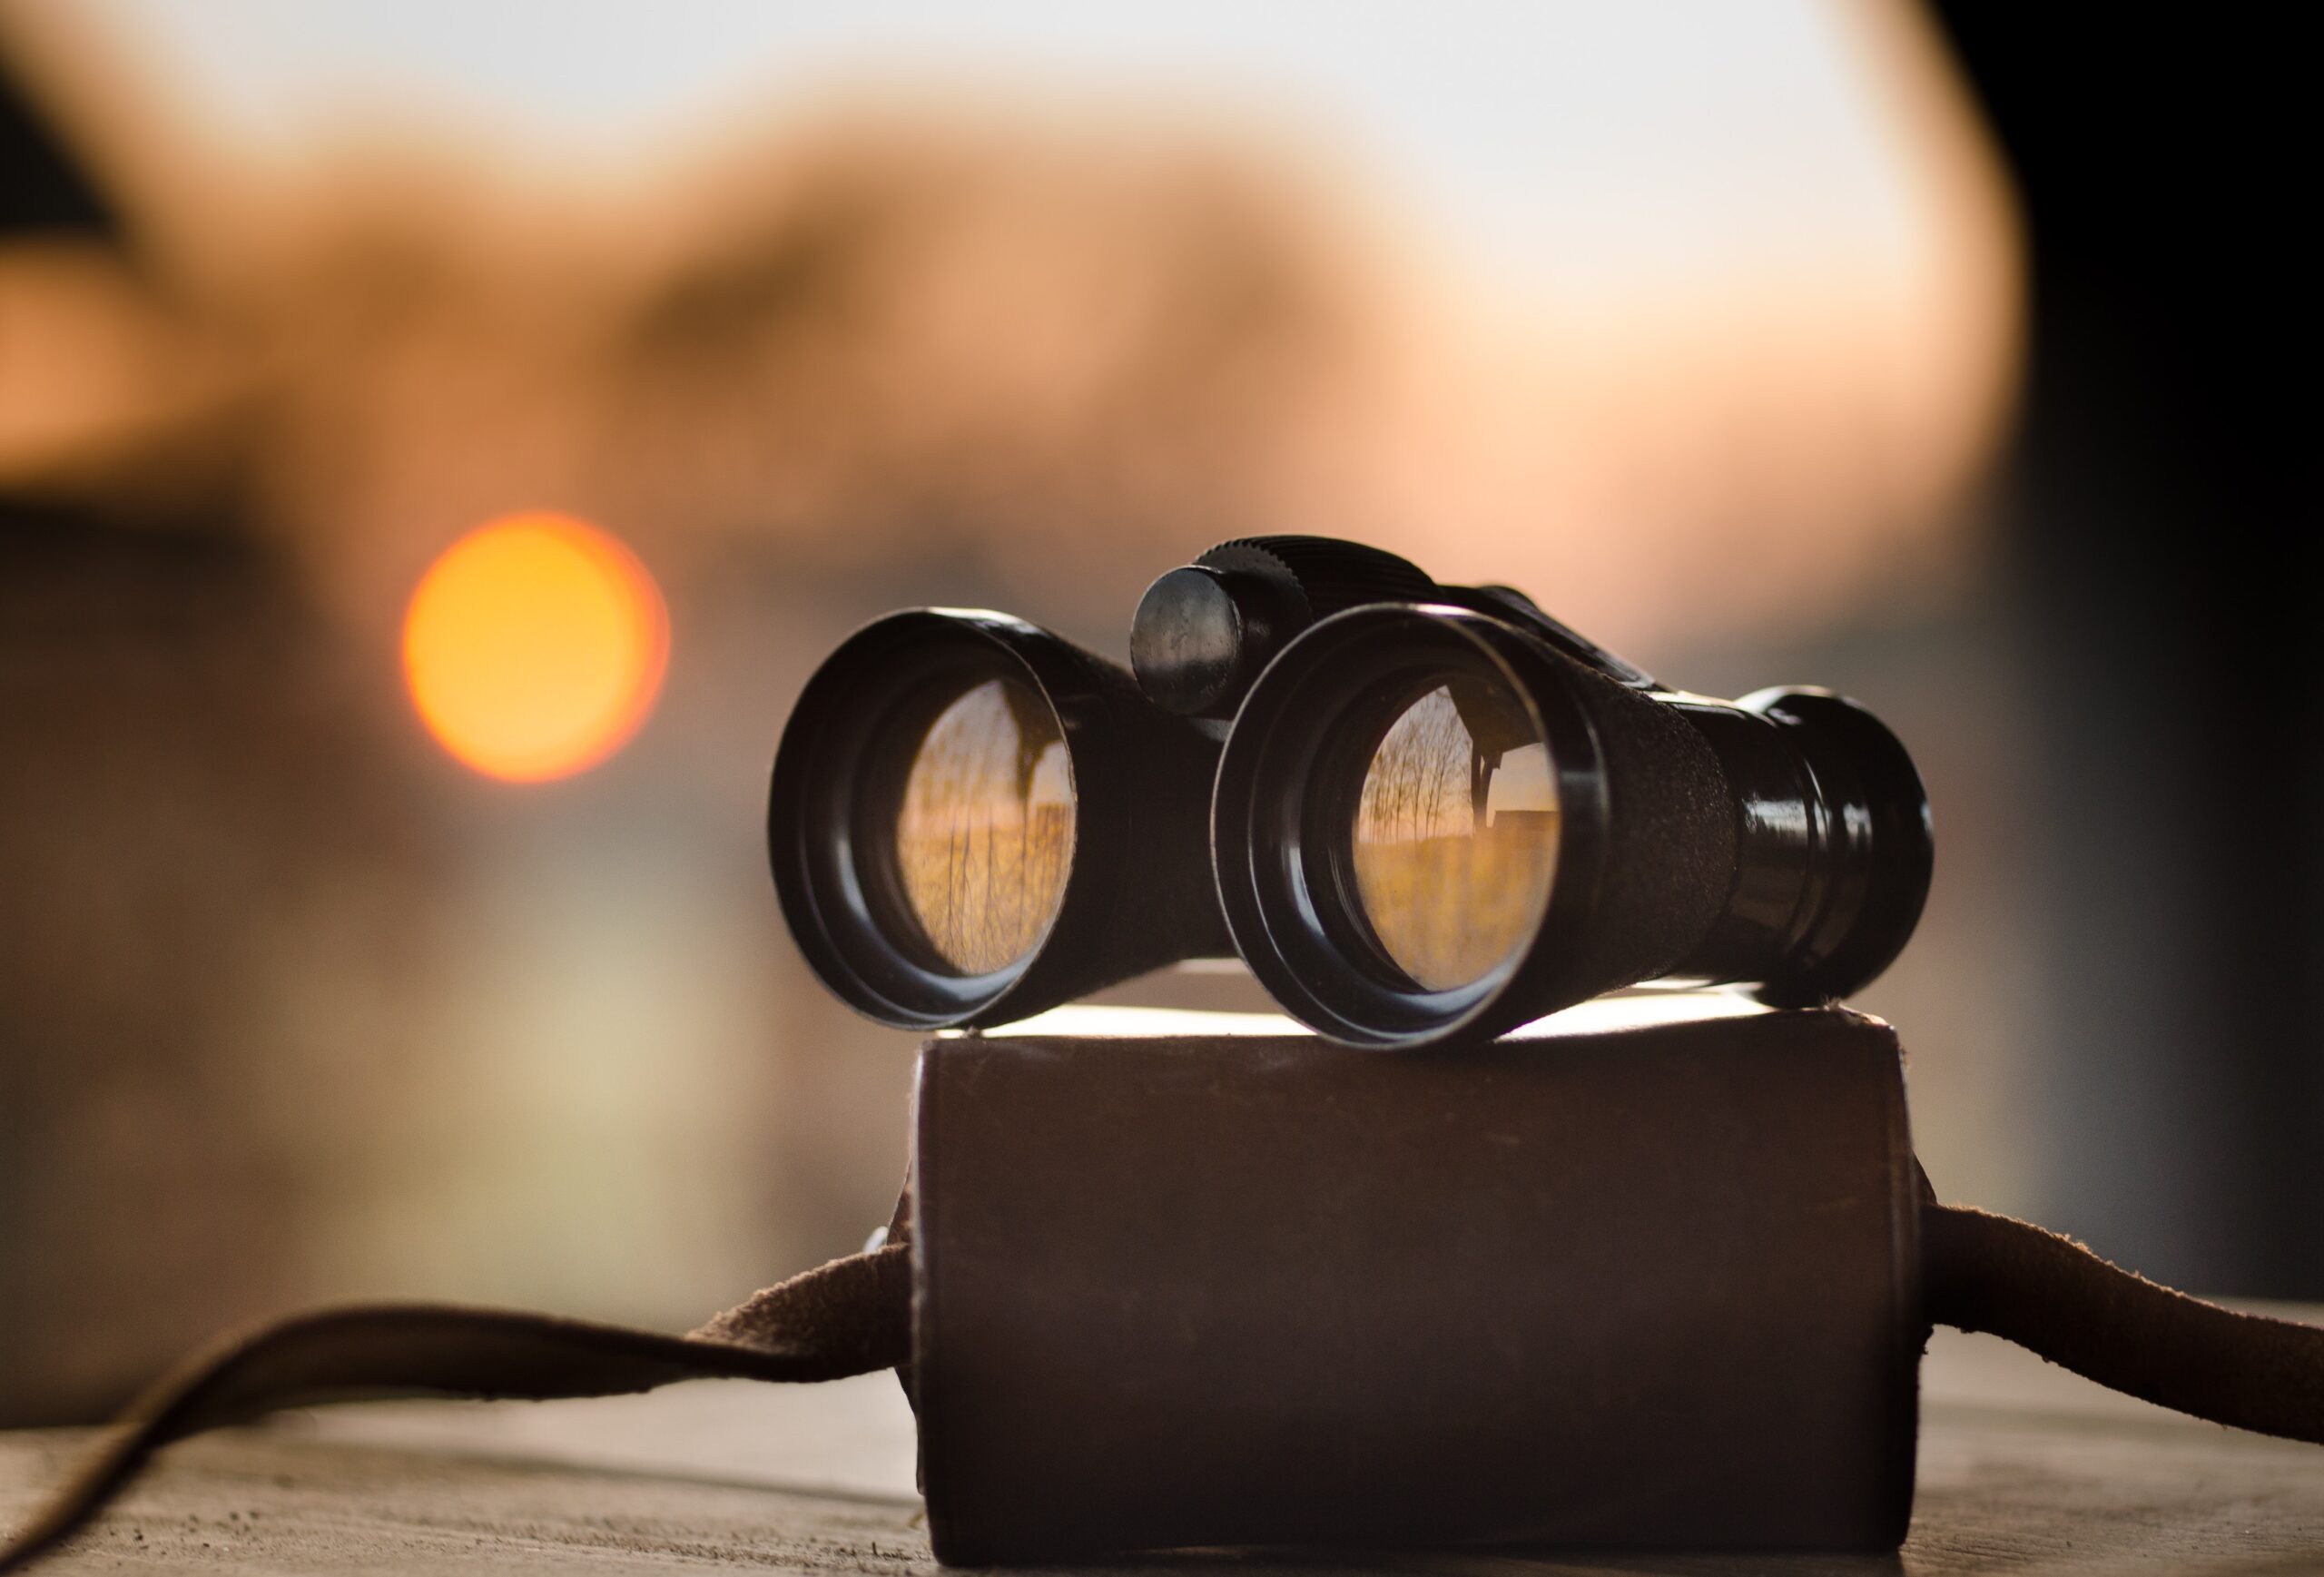 A pair of binoculars in front of a sunset background, reflecting how member directories can allow users to find what they are looking for.